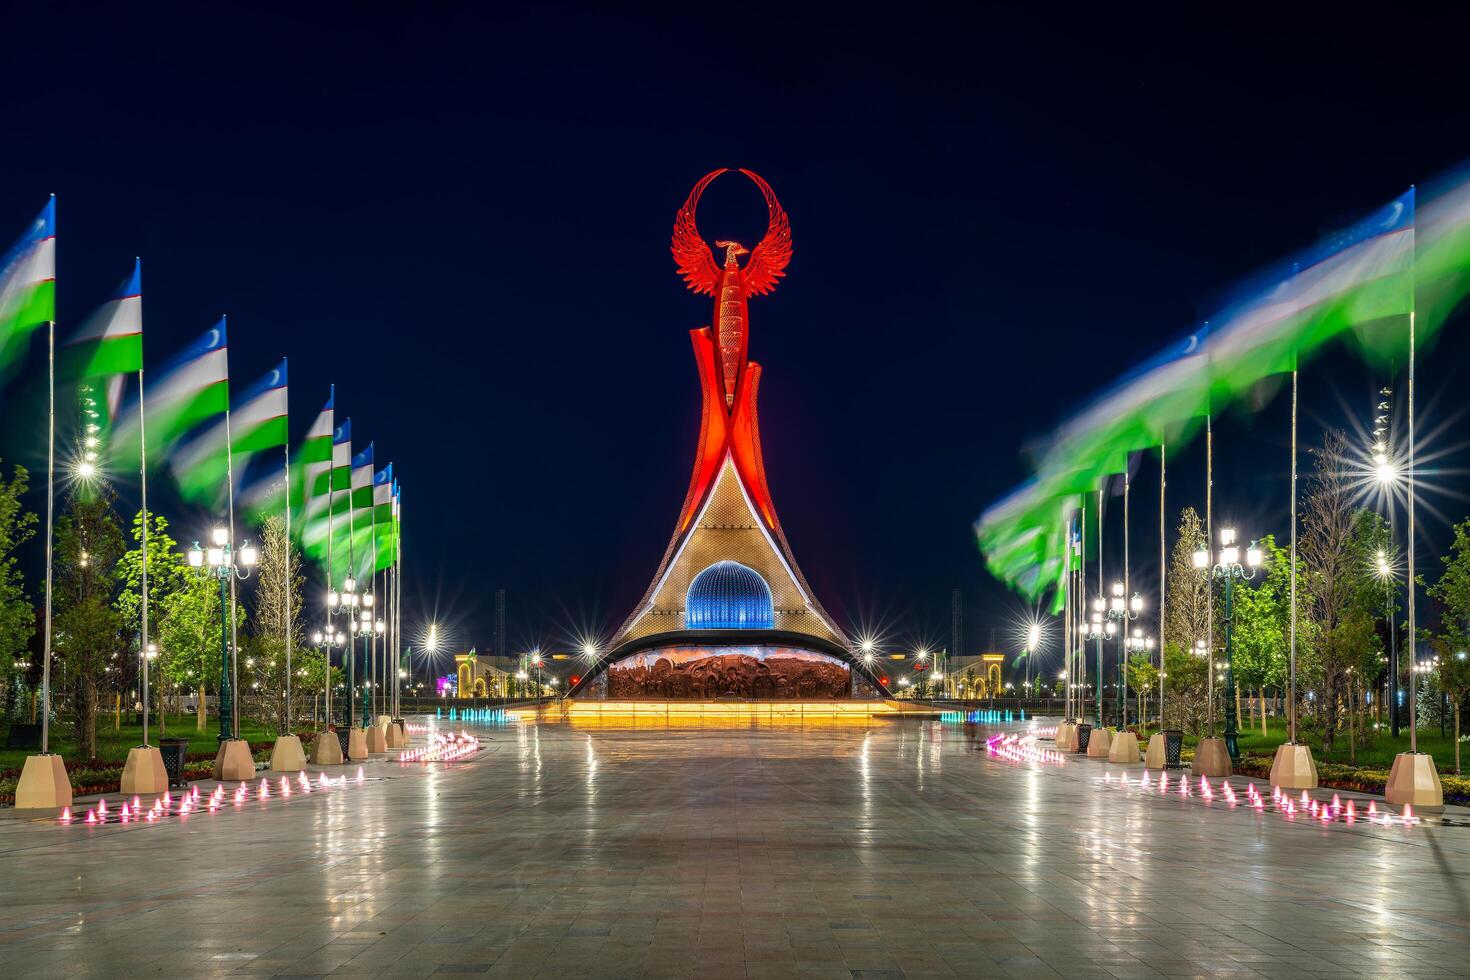 UZBEKISTAN, TASHKENT - MAY 5, 2023 Illuminated monument of independence in the form of a stele with a Humo bird, fountains and waving flags in the New Uzbekistan park at nighttime. photo